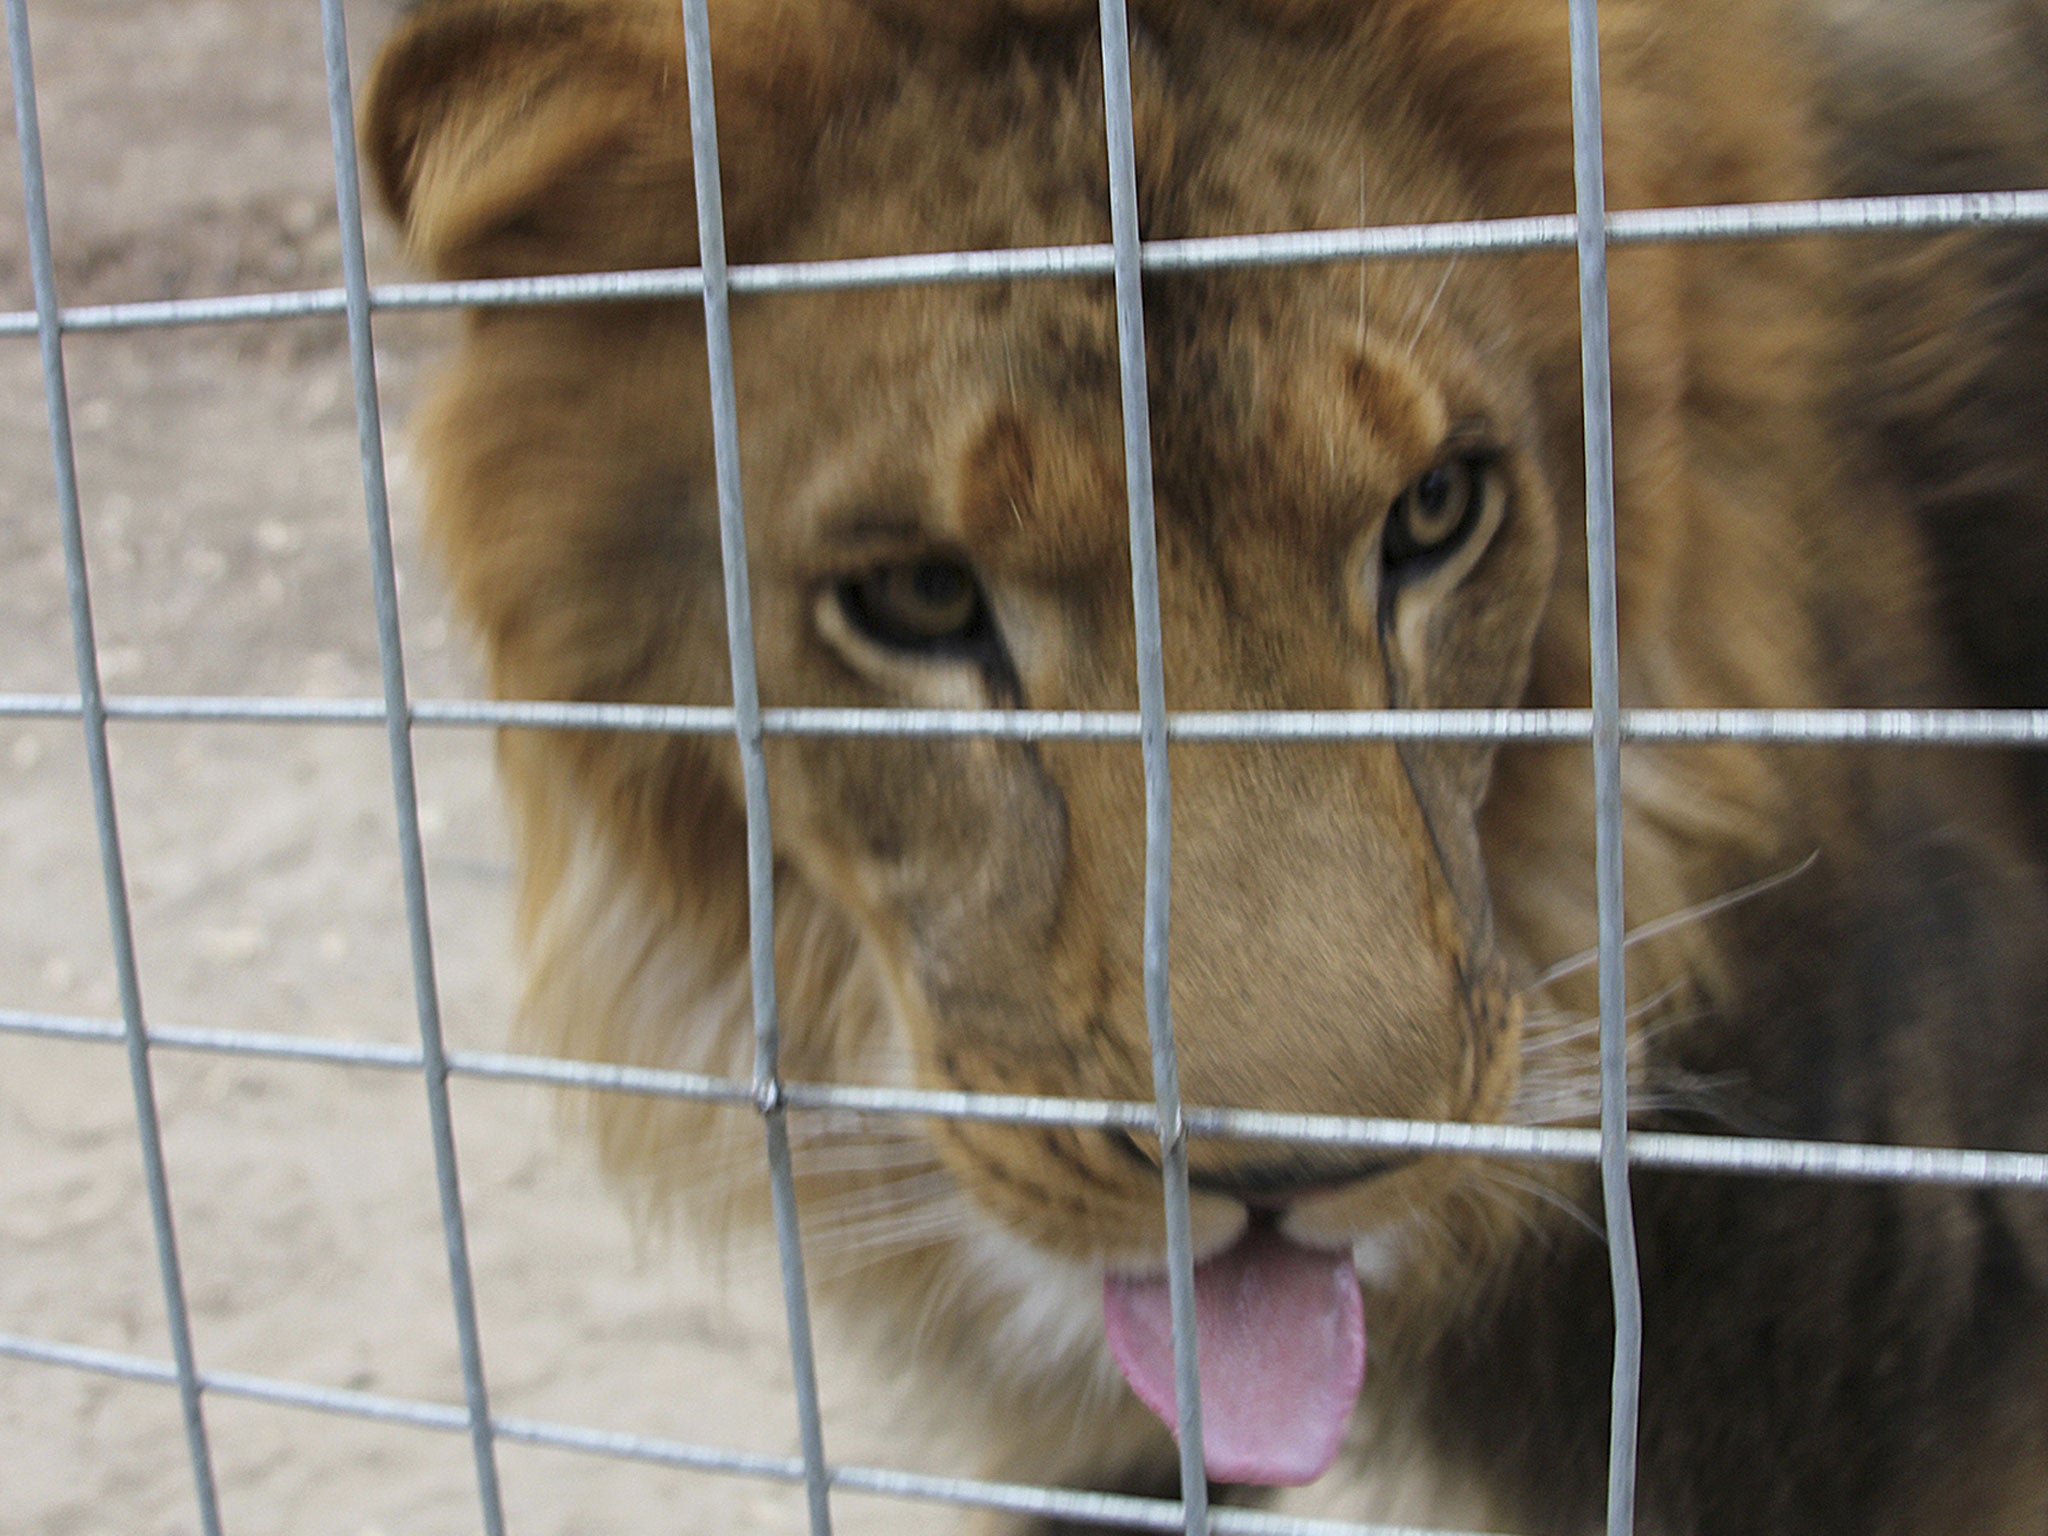 A female volunteer was killed by a lion at a private wild animal park in Central California